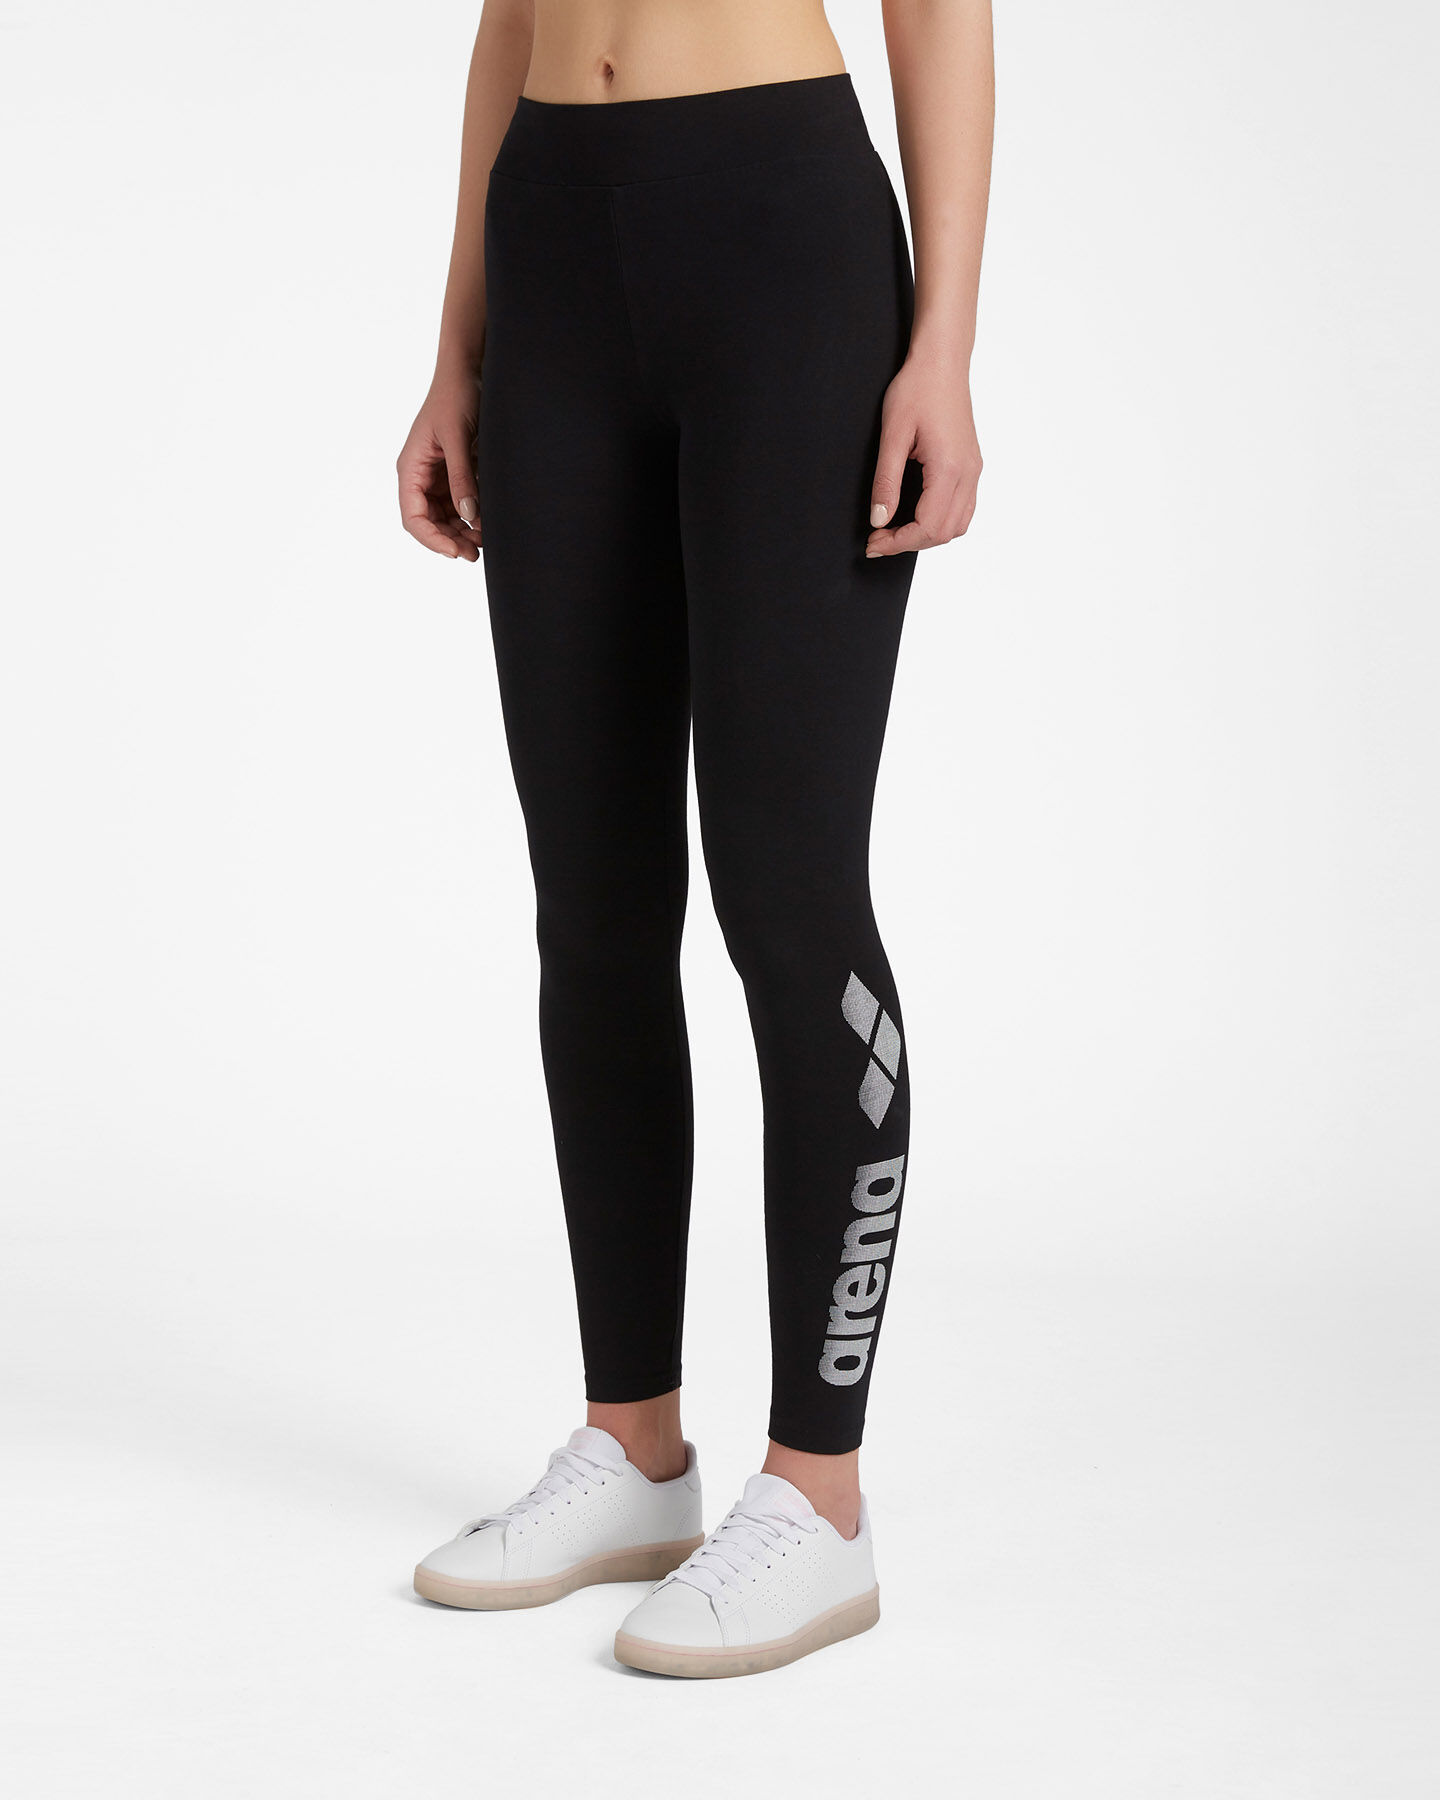  Leggings ARENA JSTRETCH  W S4087534|050|XS scatto 2